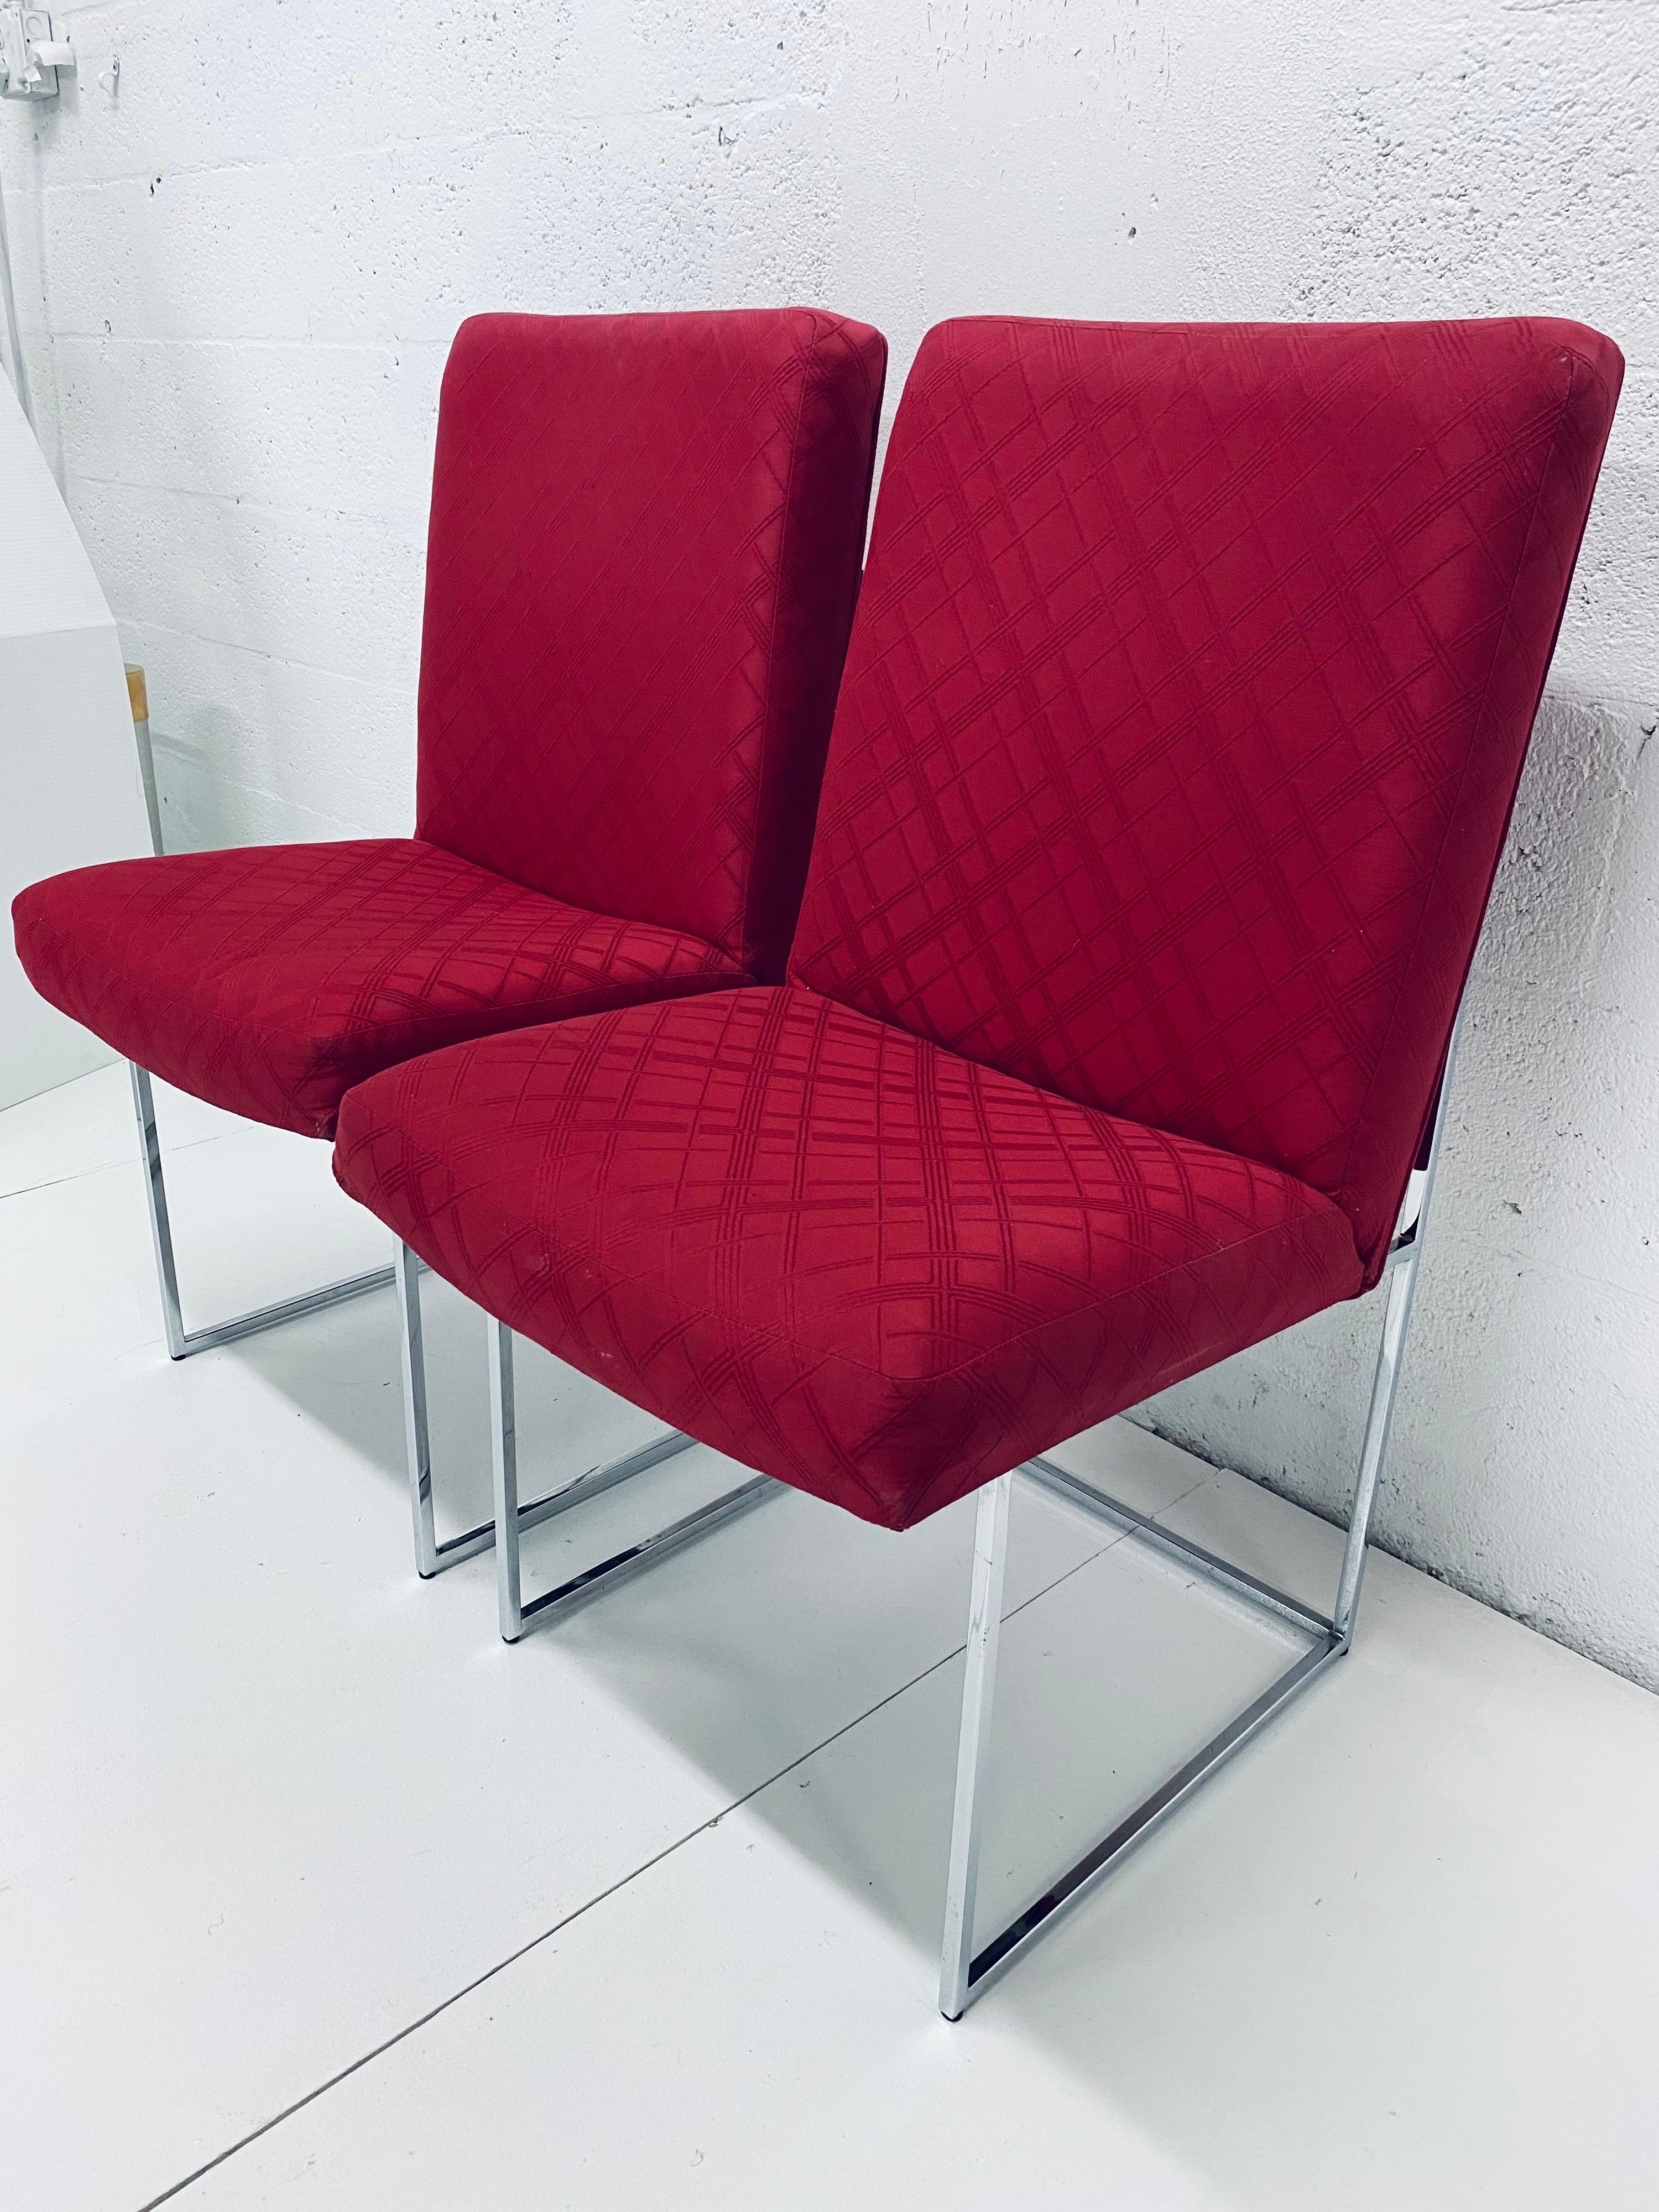 Iconic 1970s Milo Baughman for Thayer Coggin Thin-Line dining chairs with chrome bases. Fabric is original and new upholstery is recommended.